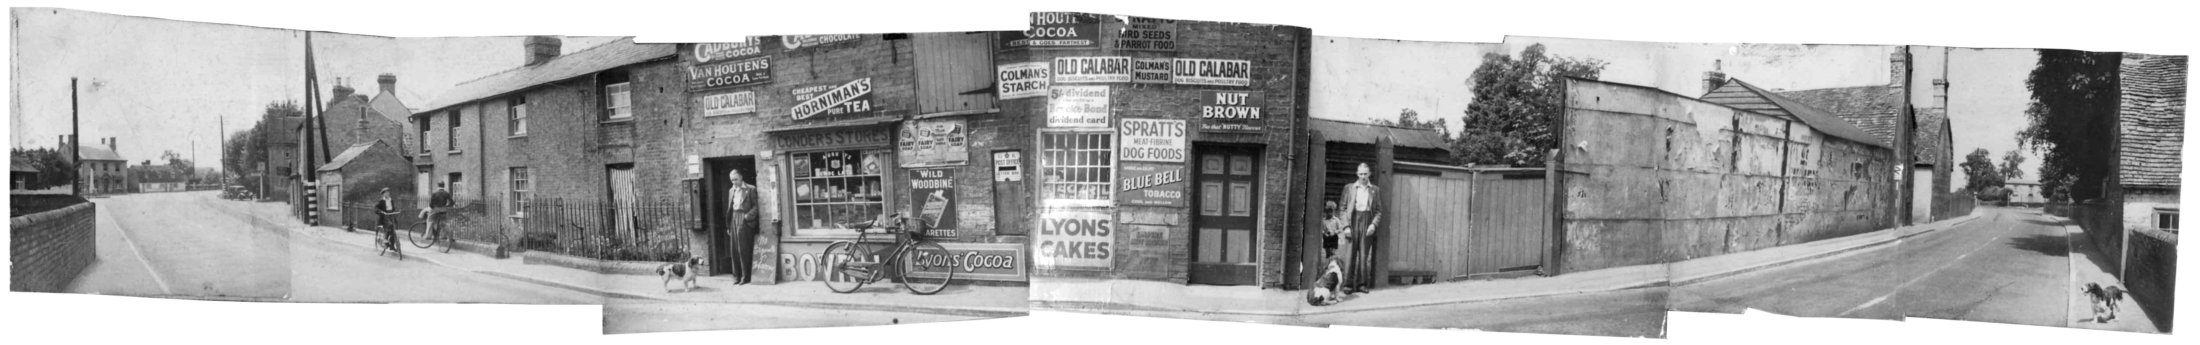 Panorama centred on Arthur Conder's Grocers Shop